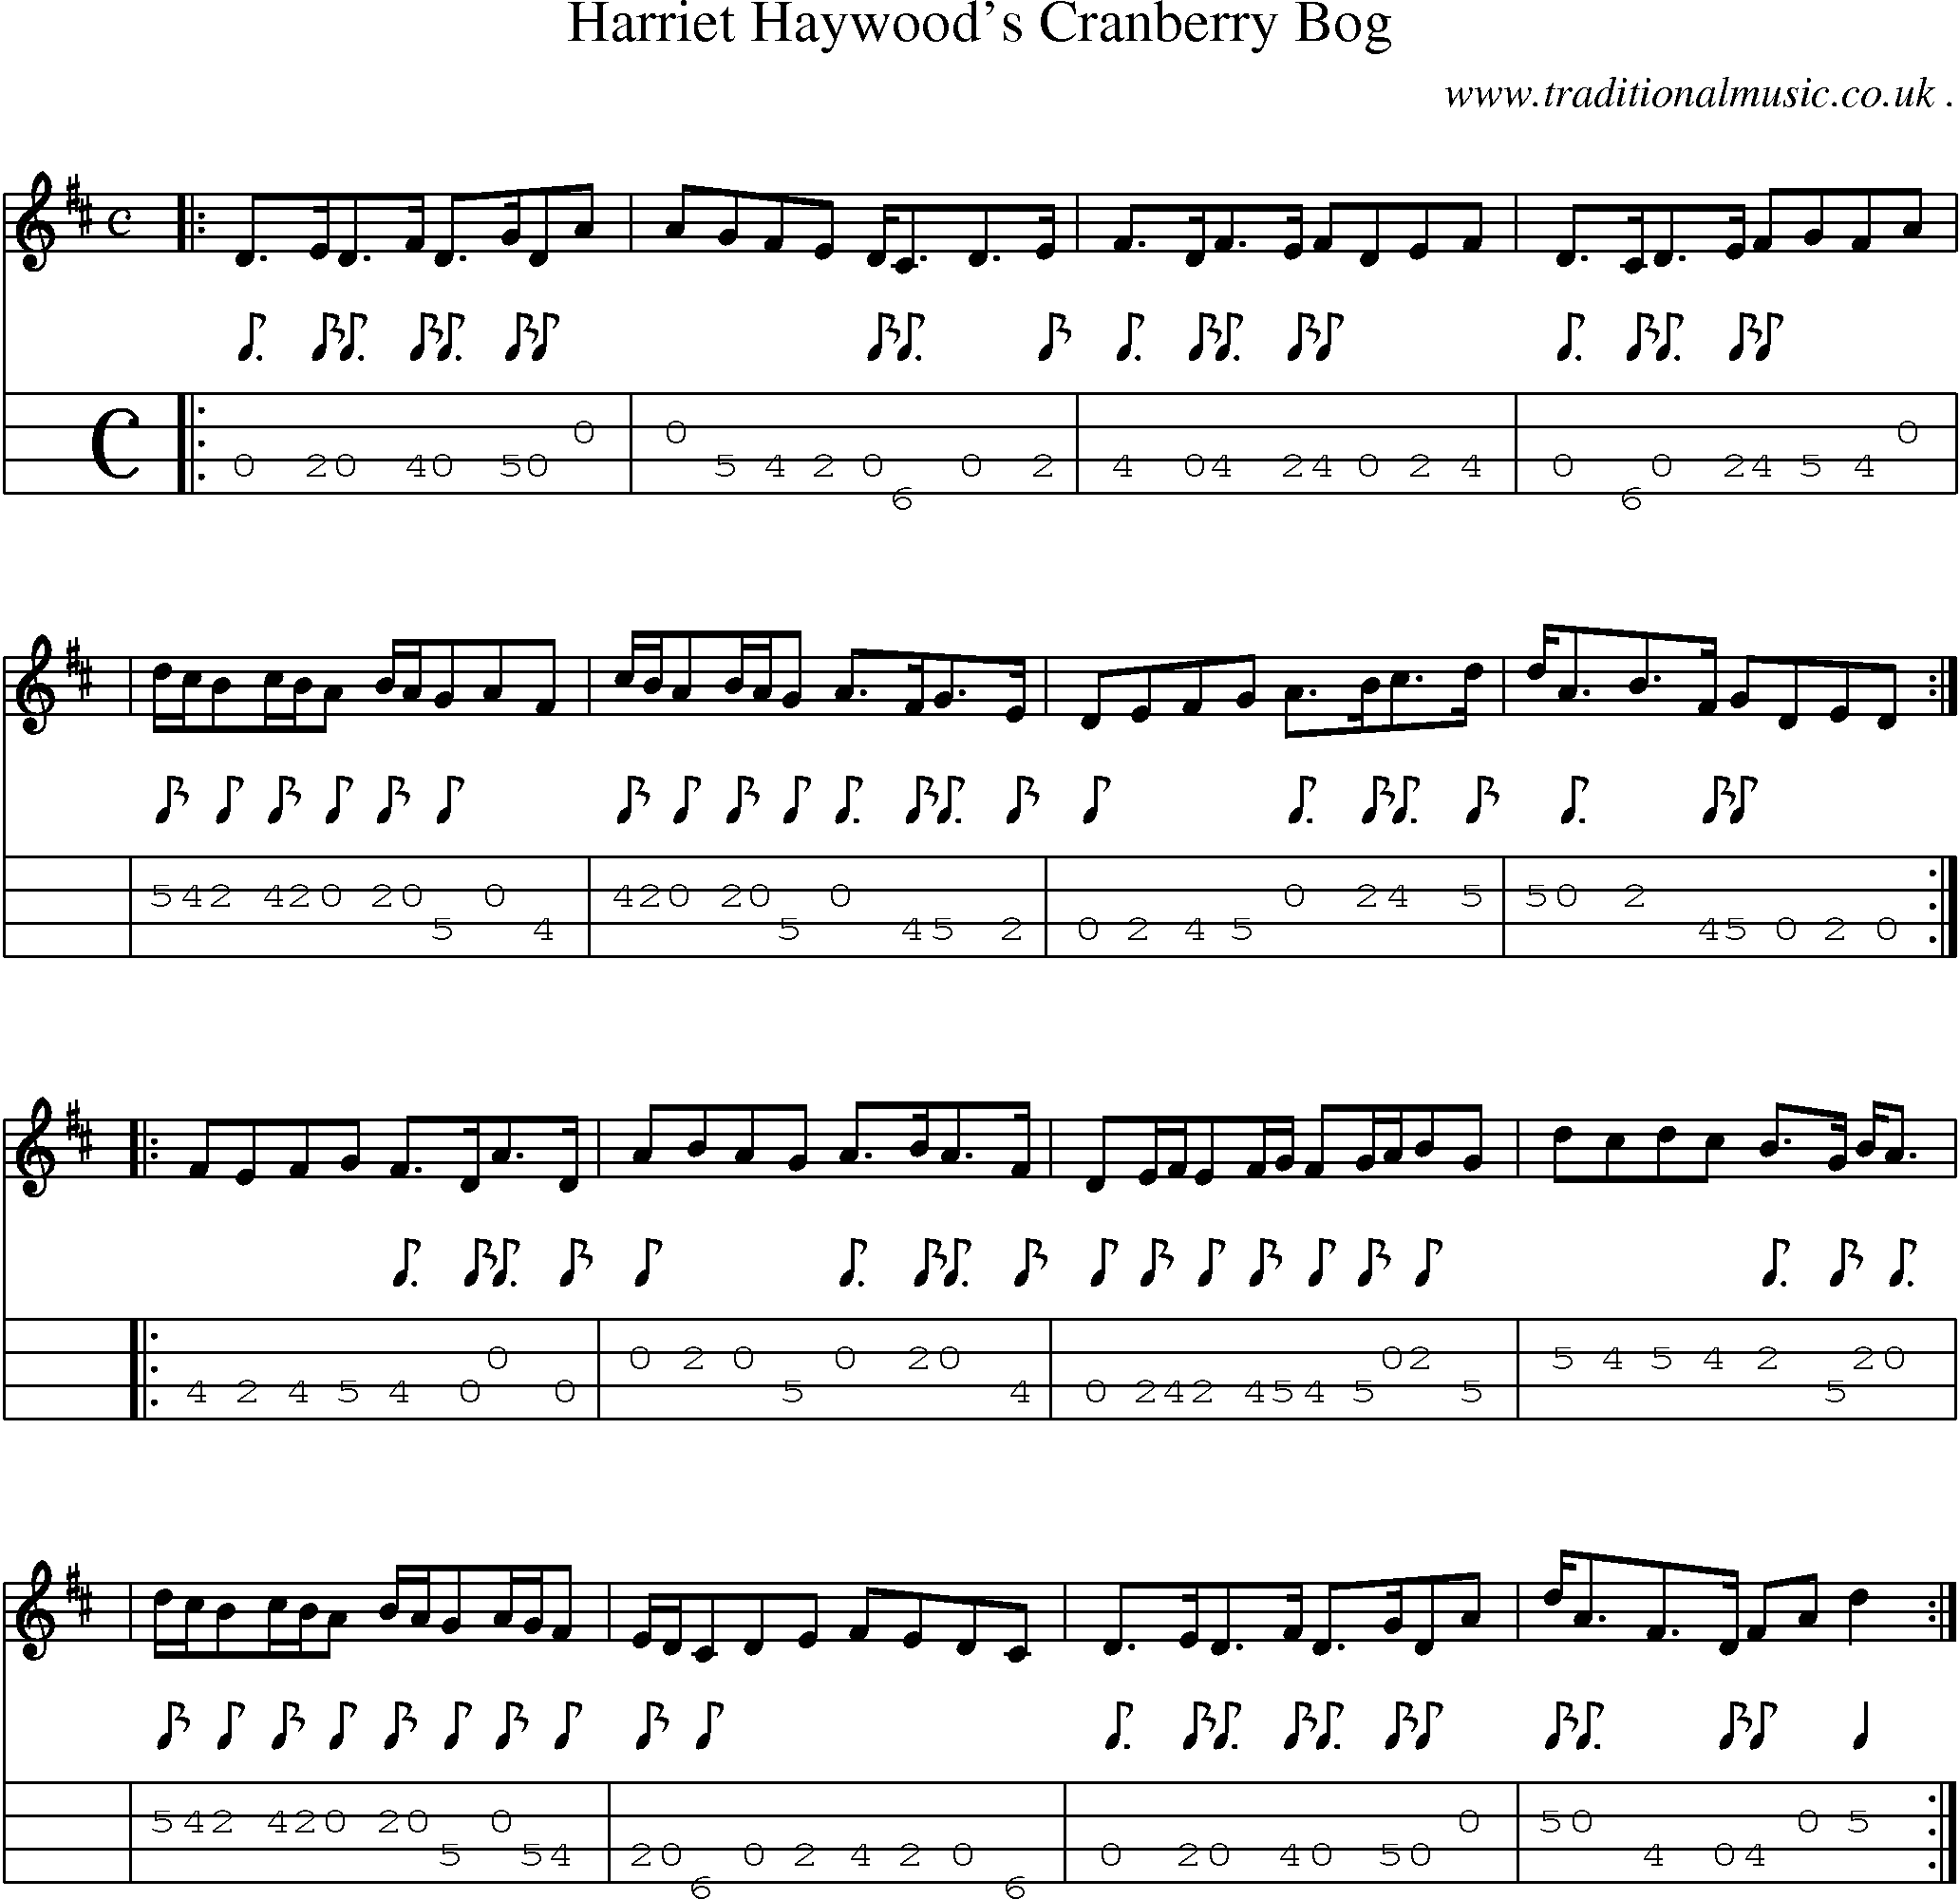 Sheet-music  score, Chords and Mandolin Tabs for Harriet Haywoods Cranberry Bog